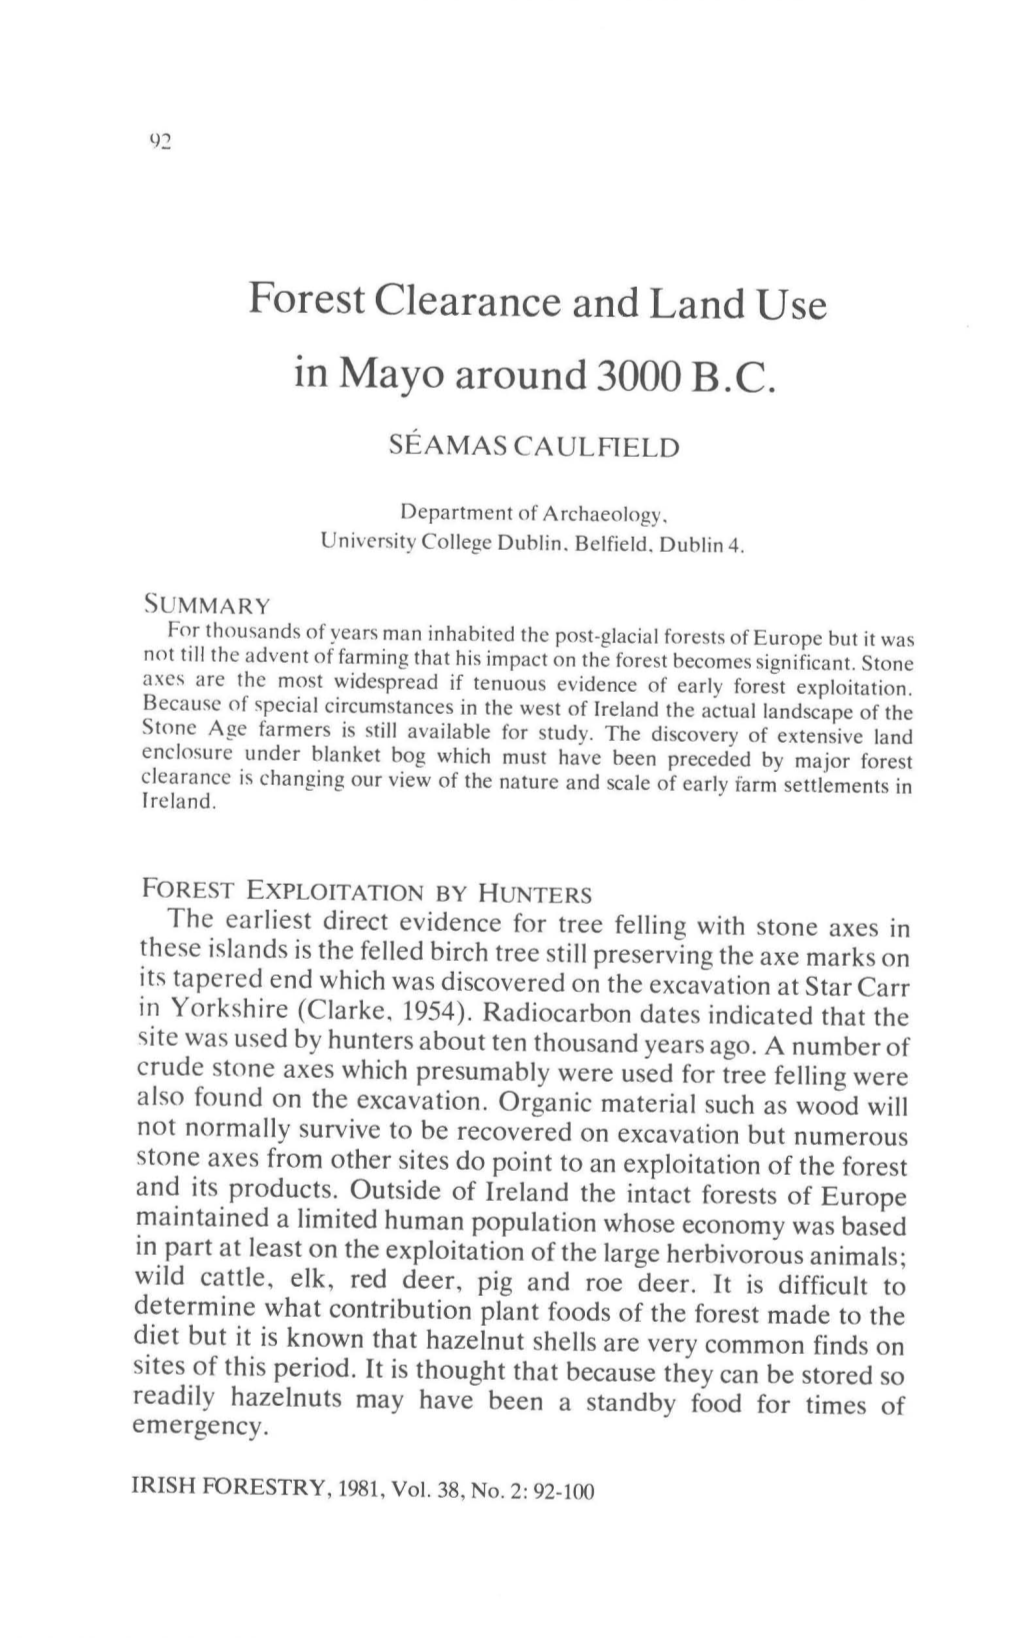 Forest Clearance and Land Use in Mayo Around 3000 B.C